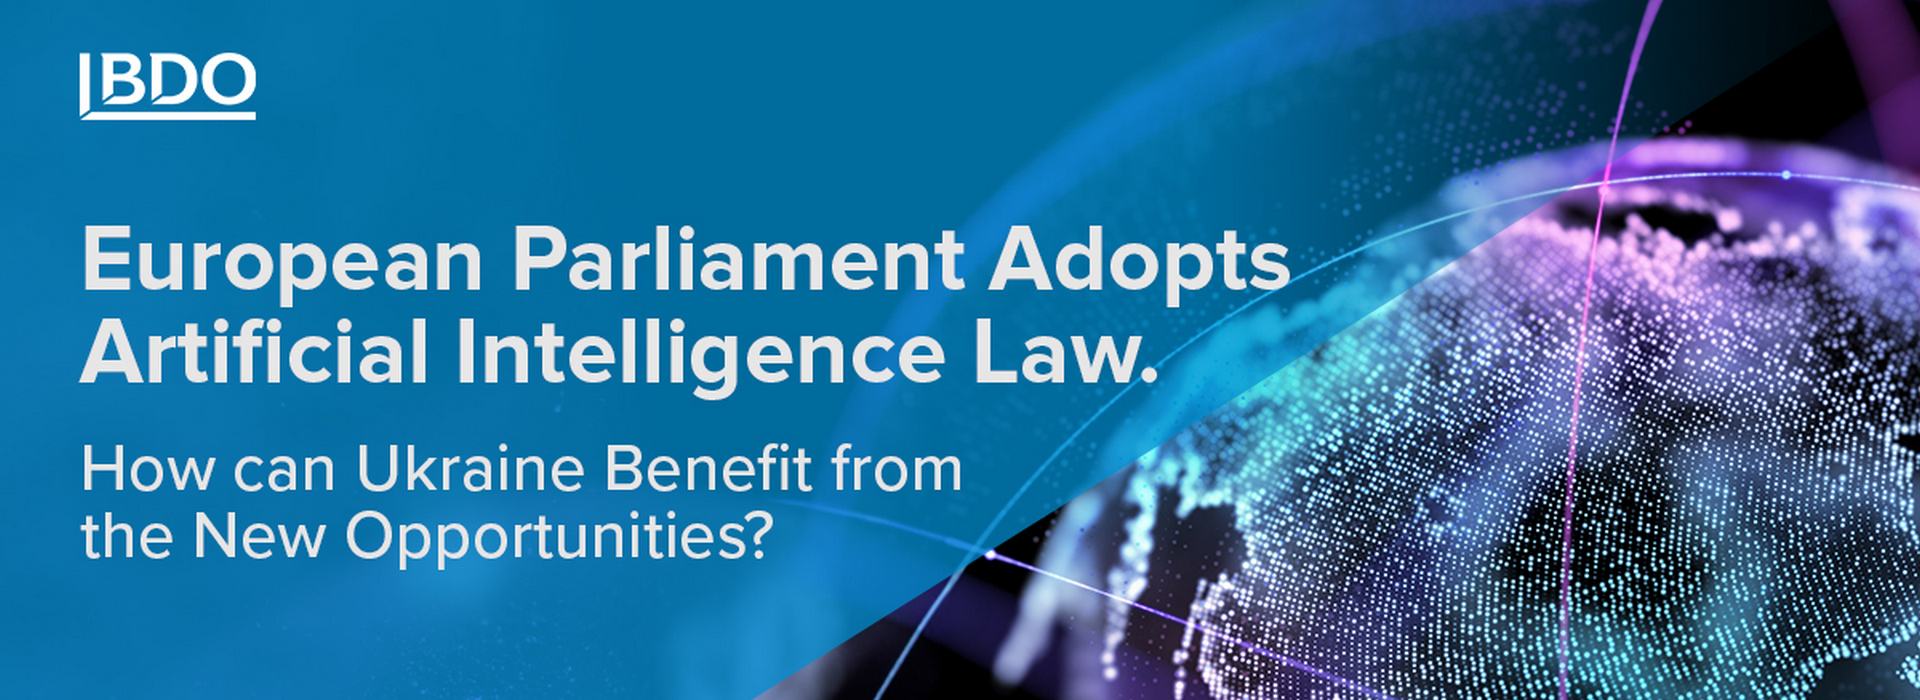 BDO in Ukraine Explains: How Ukraine Can Use New Opportunities after the European Parliament’s Adoption of the Artificial Intelligence Law